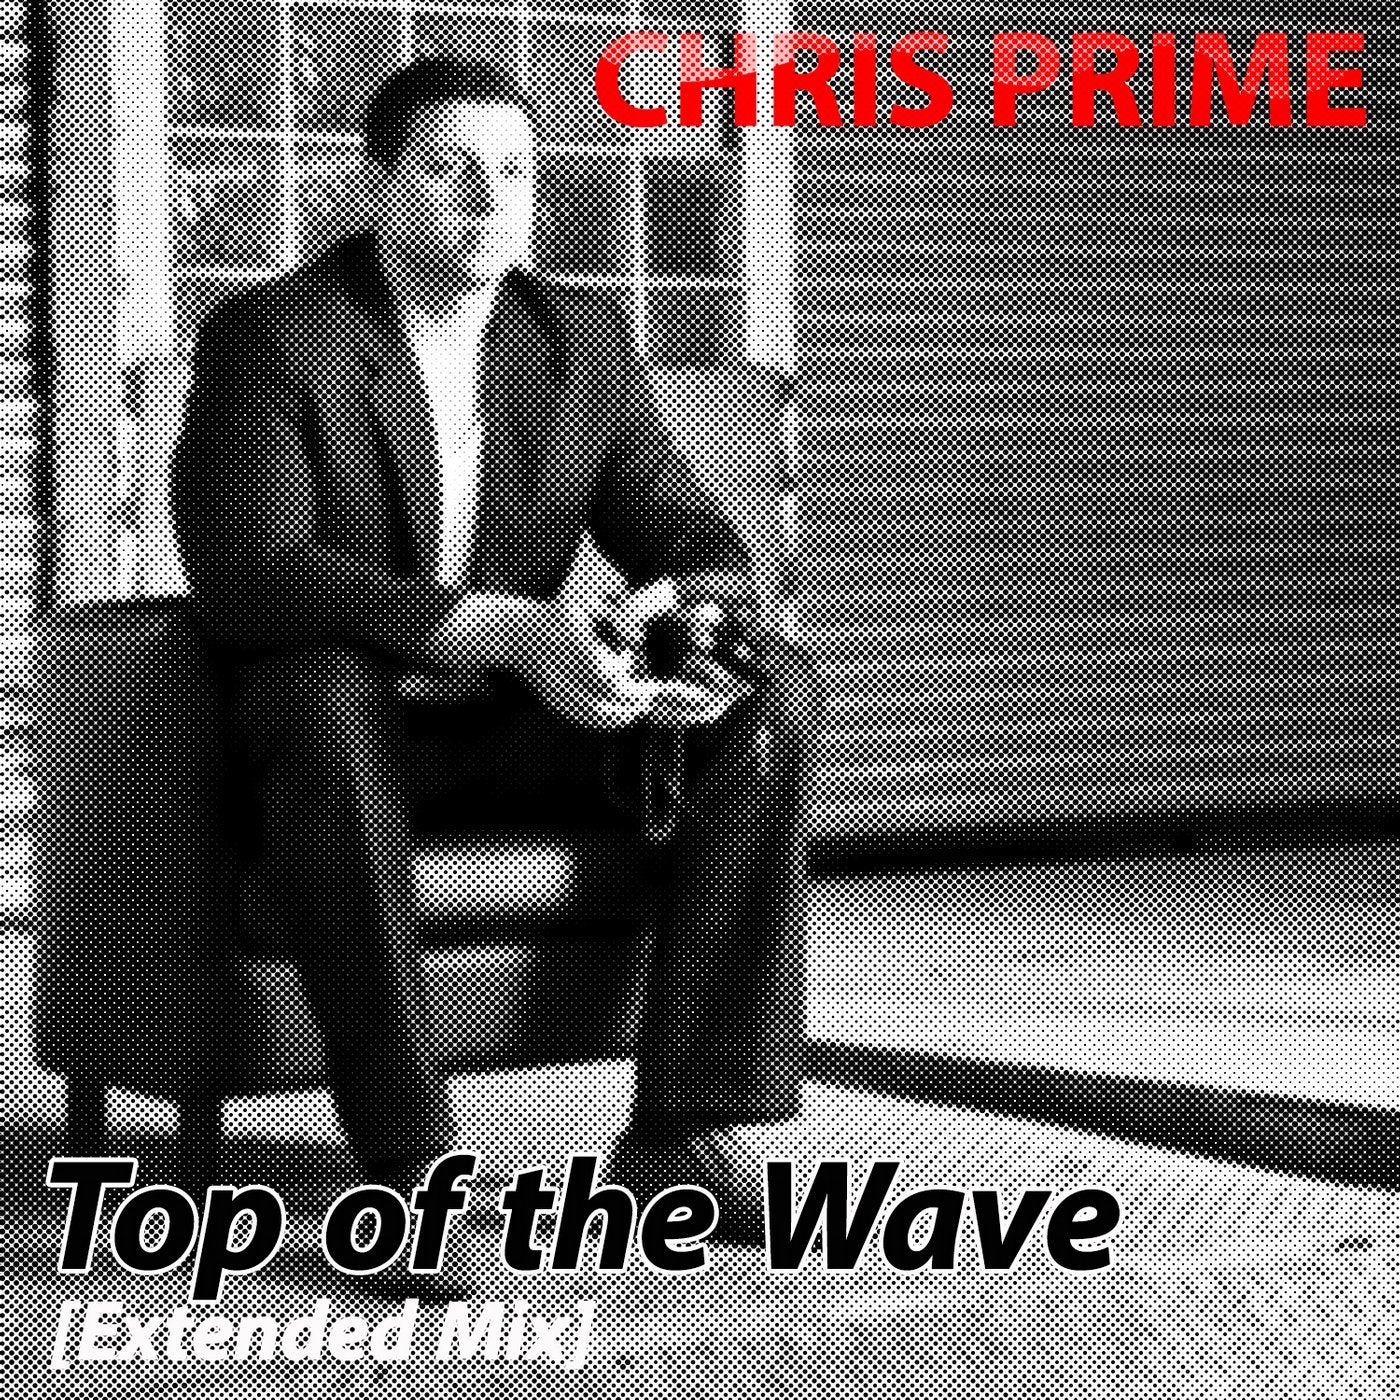 Top of the Wave(Extended Mix)